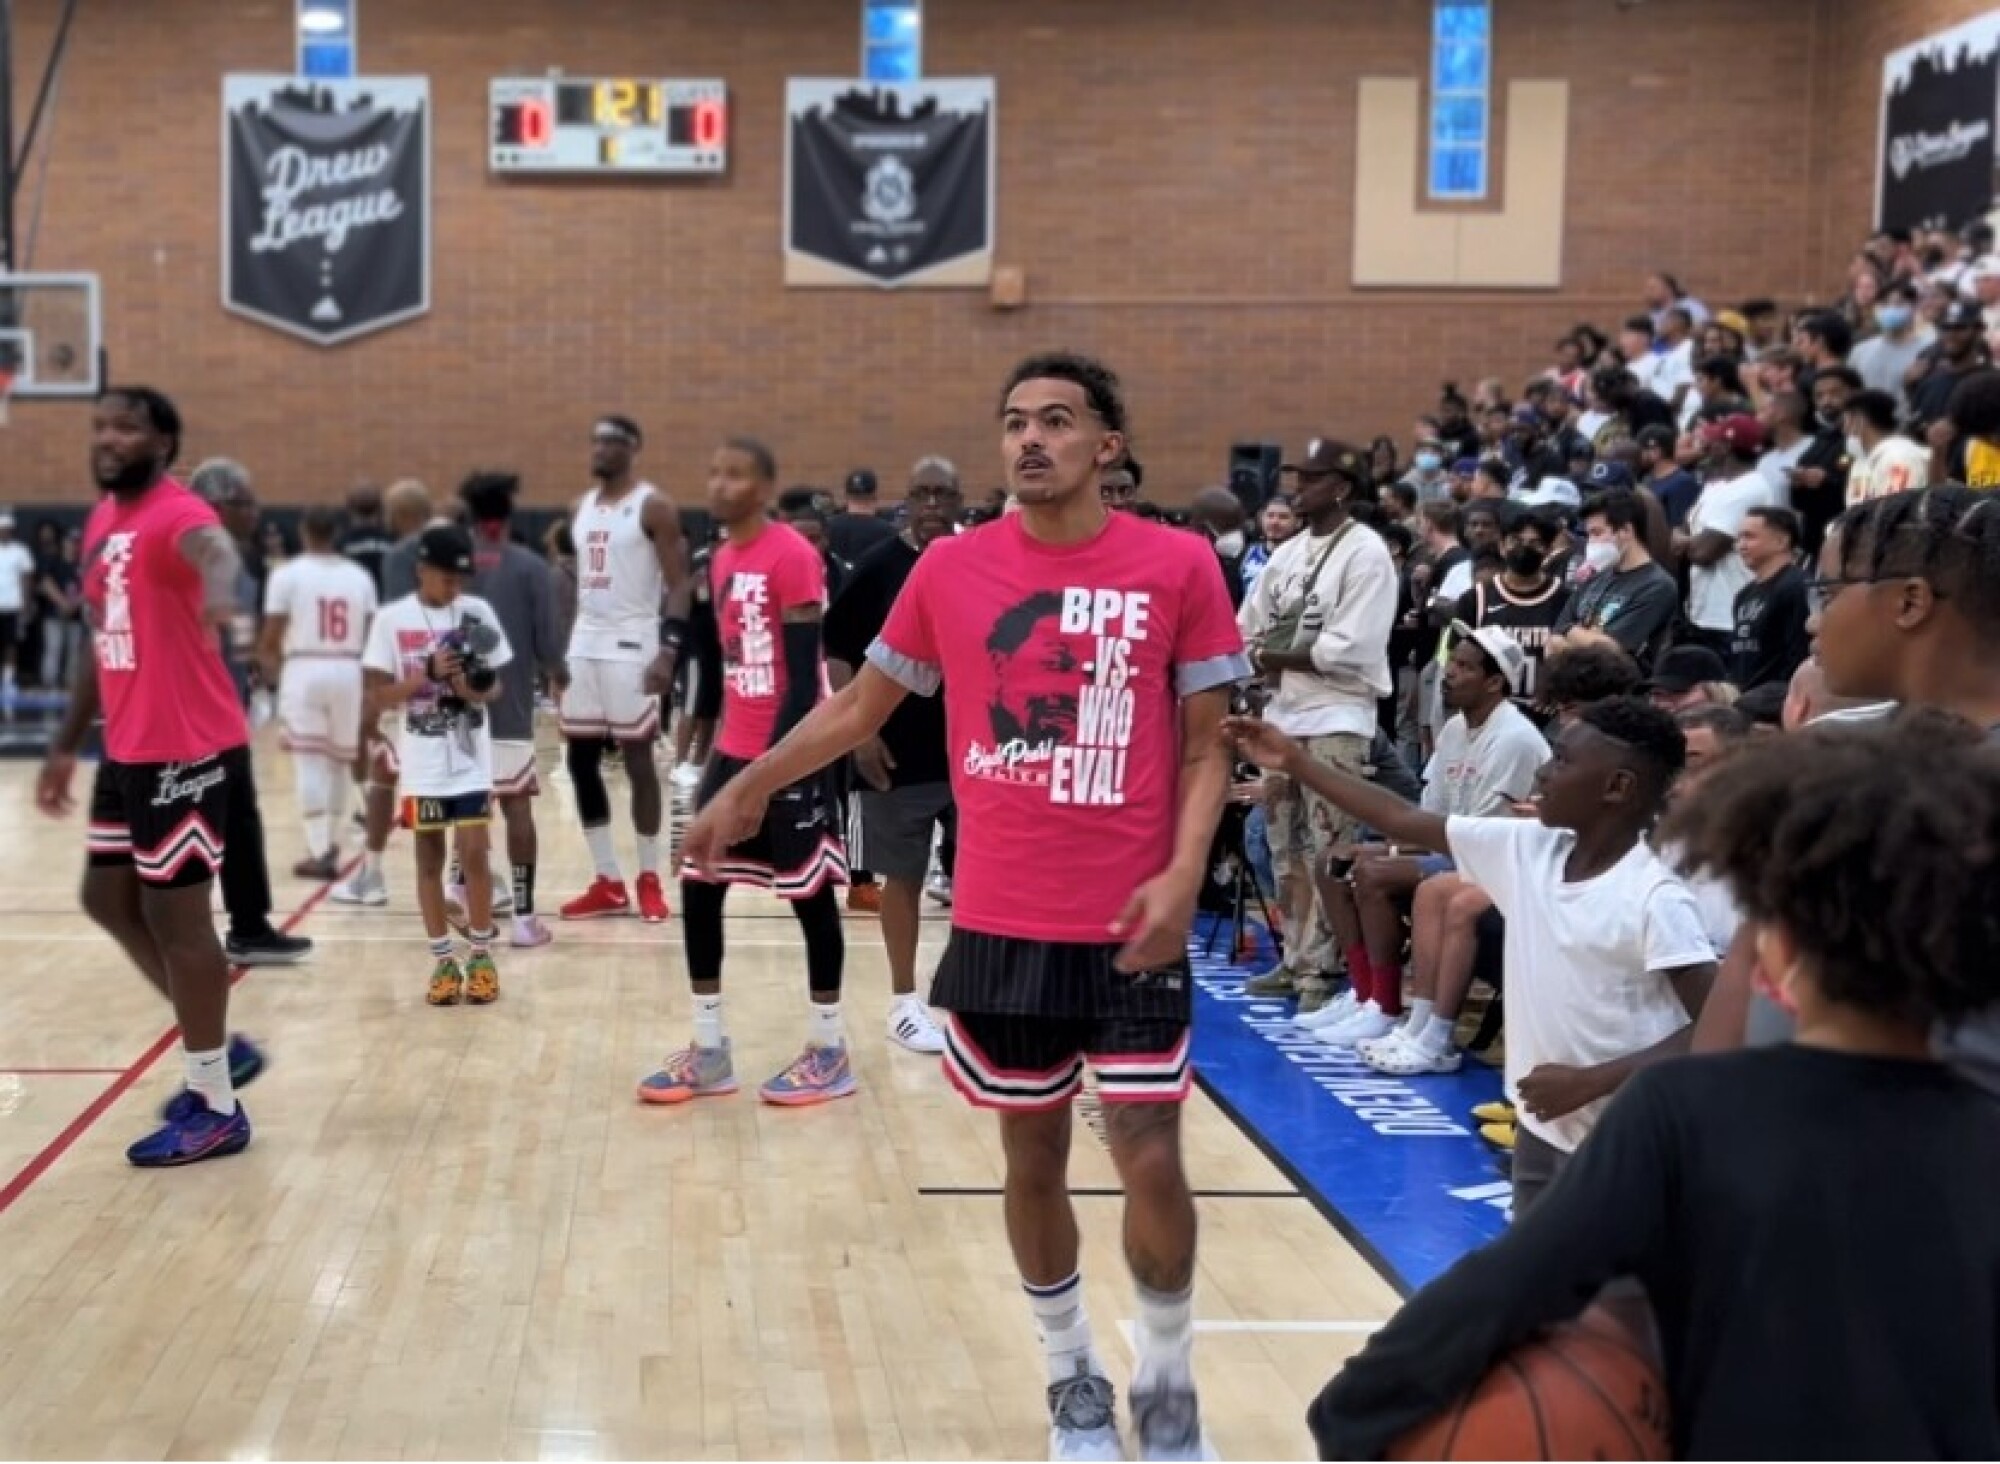 Hawks defenseman Trae Young warms up with Black Pearl Elite teammates ahead of a Drew League game on Saturday.